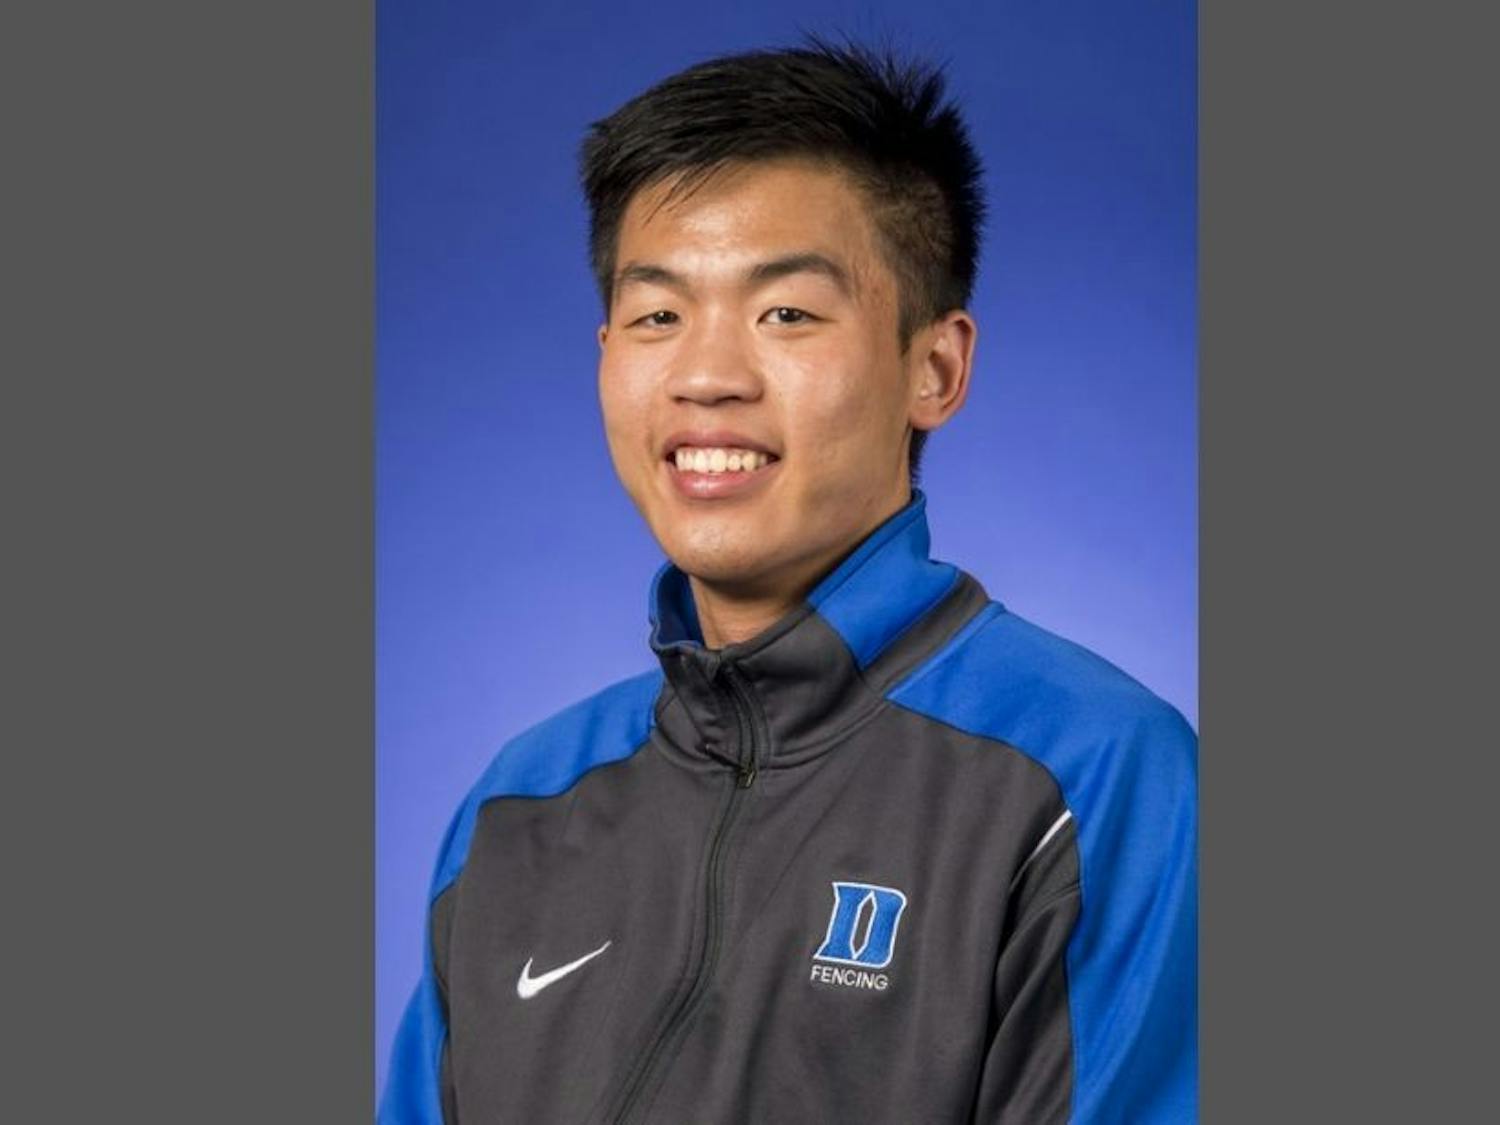 When Ping Ping Kitsiriboon's not fencing, you can often find him at Small Town Records. Courtesy of Duke Athletics.